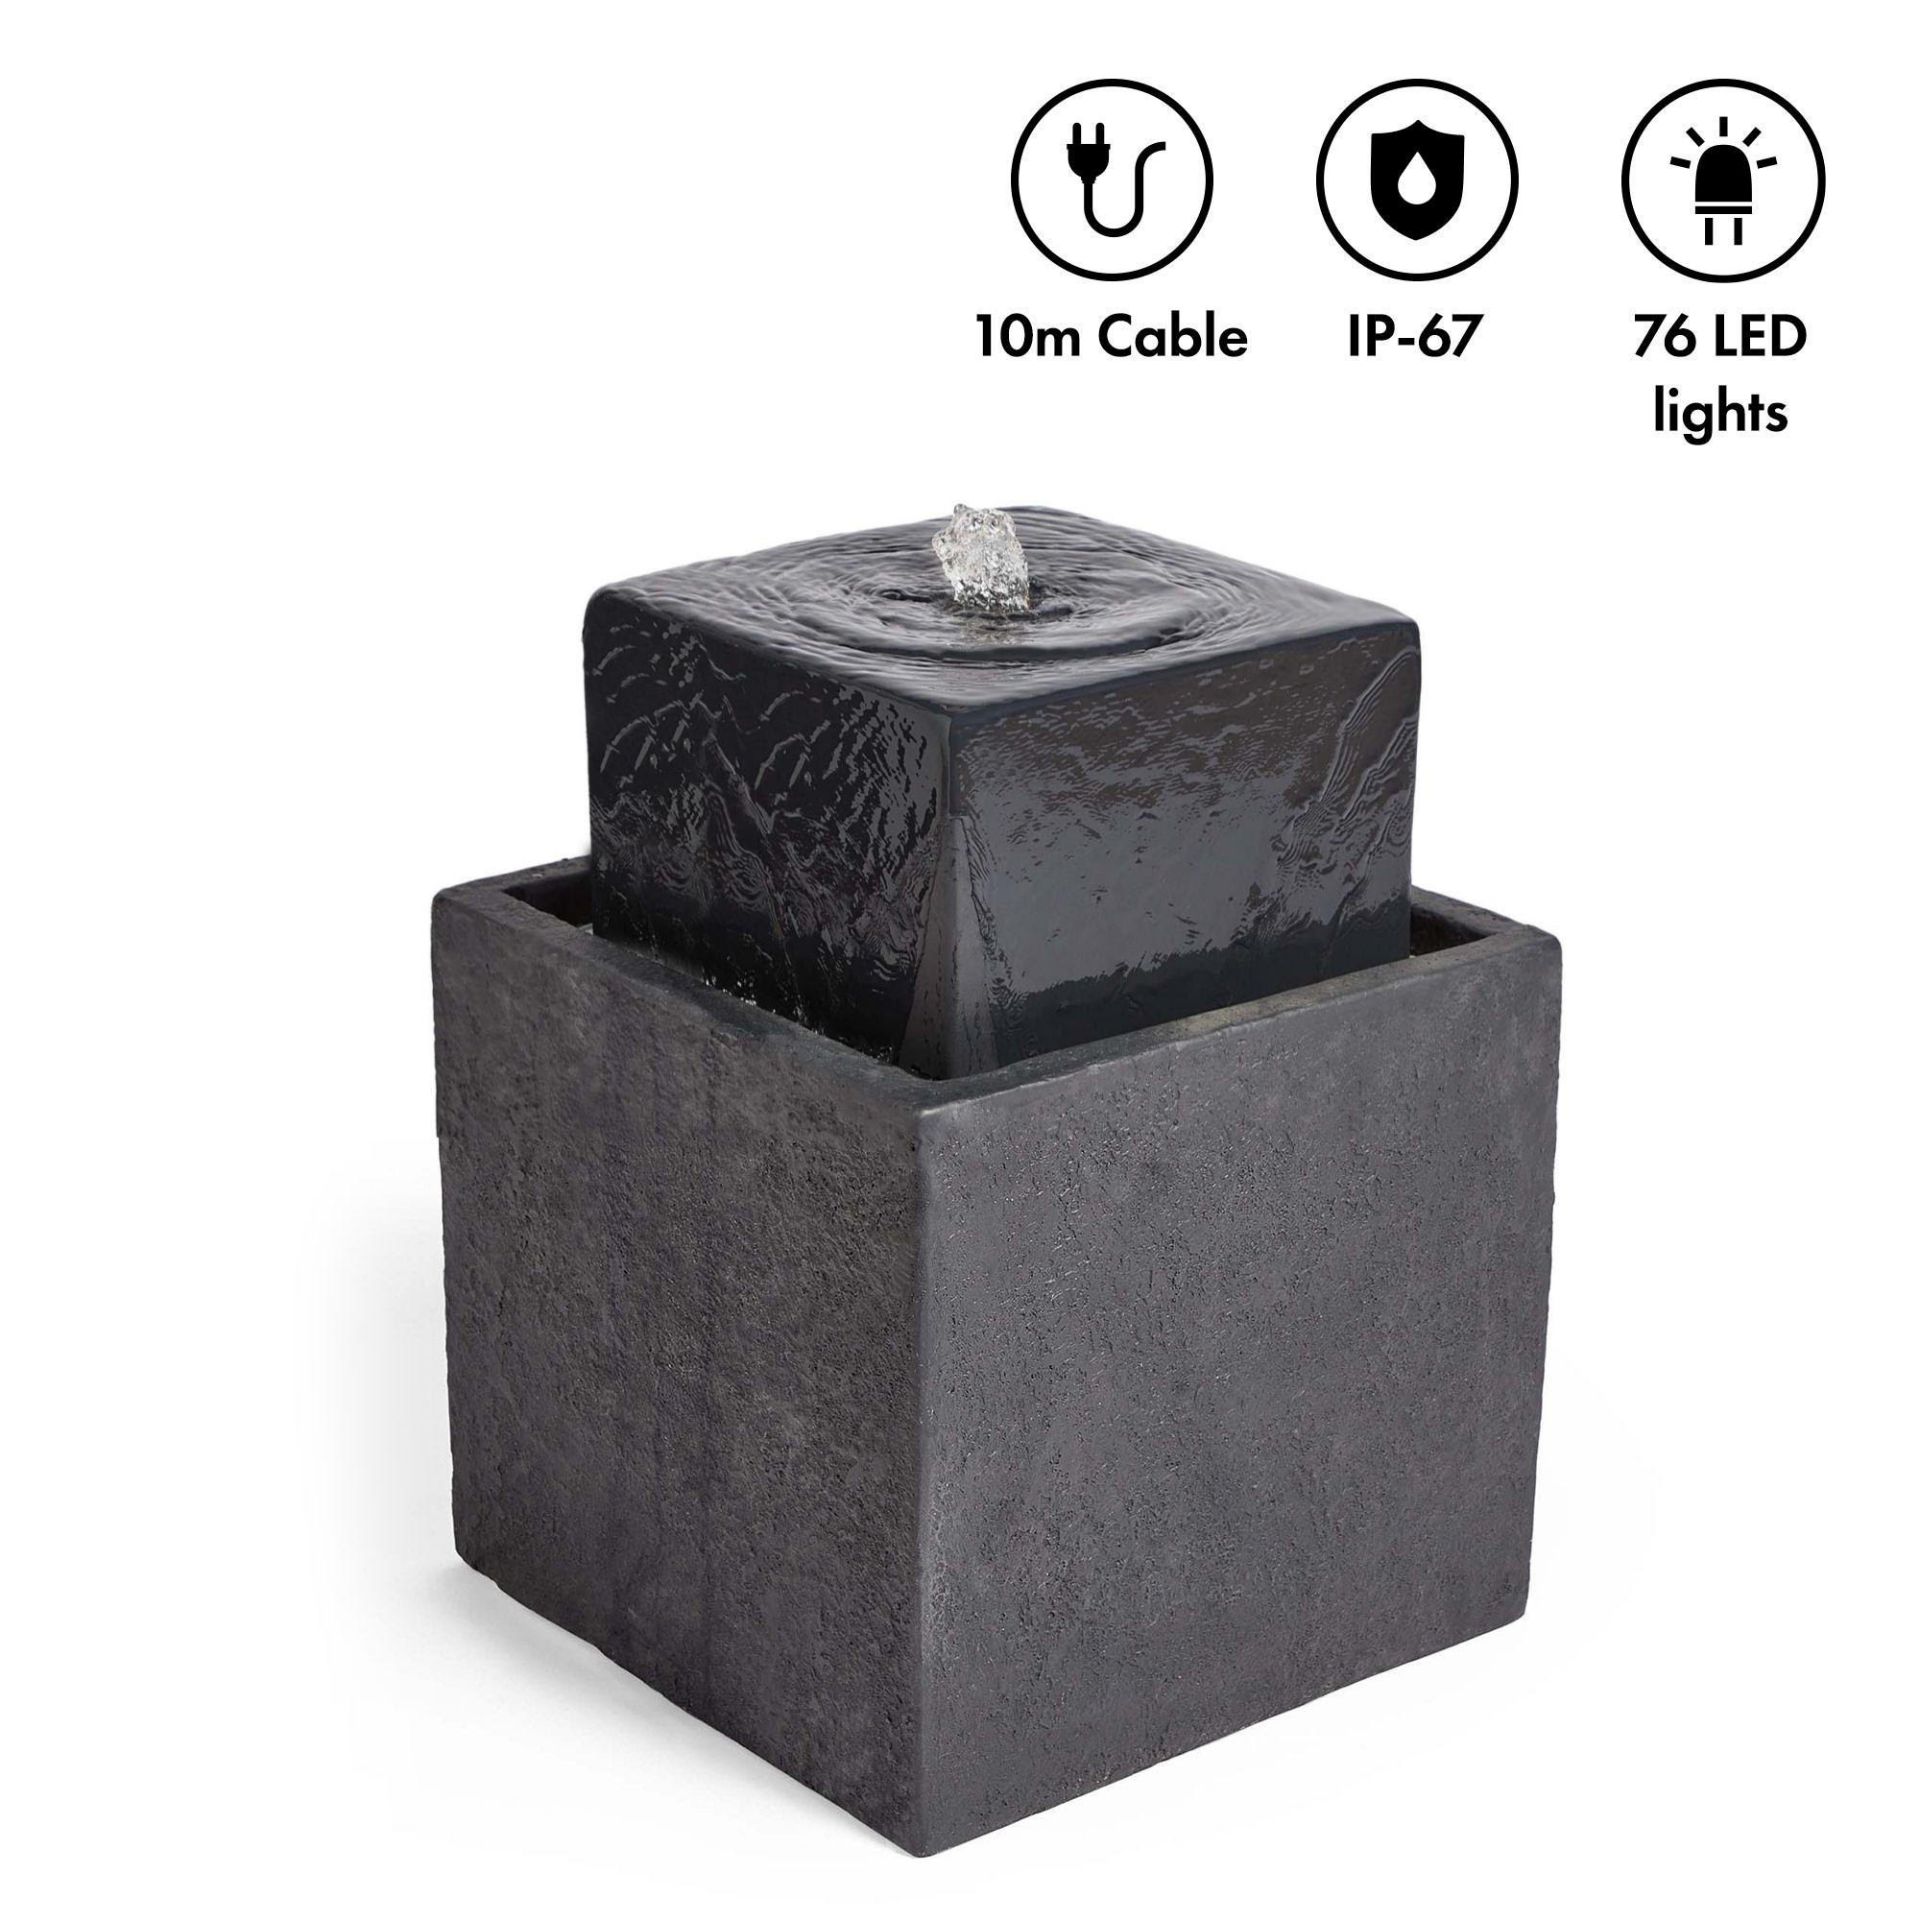 New & Boxed Square 2 Tier Water Feature. RRP £299.99. (REF671) – Indoor and Outdoor Cascading - Image 6 of 7